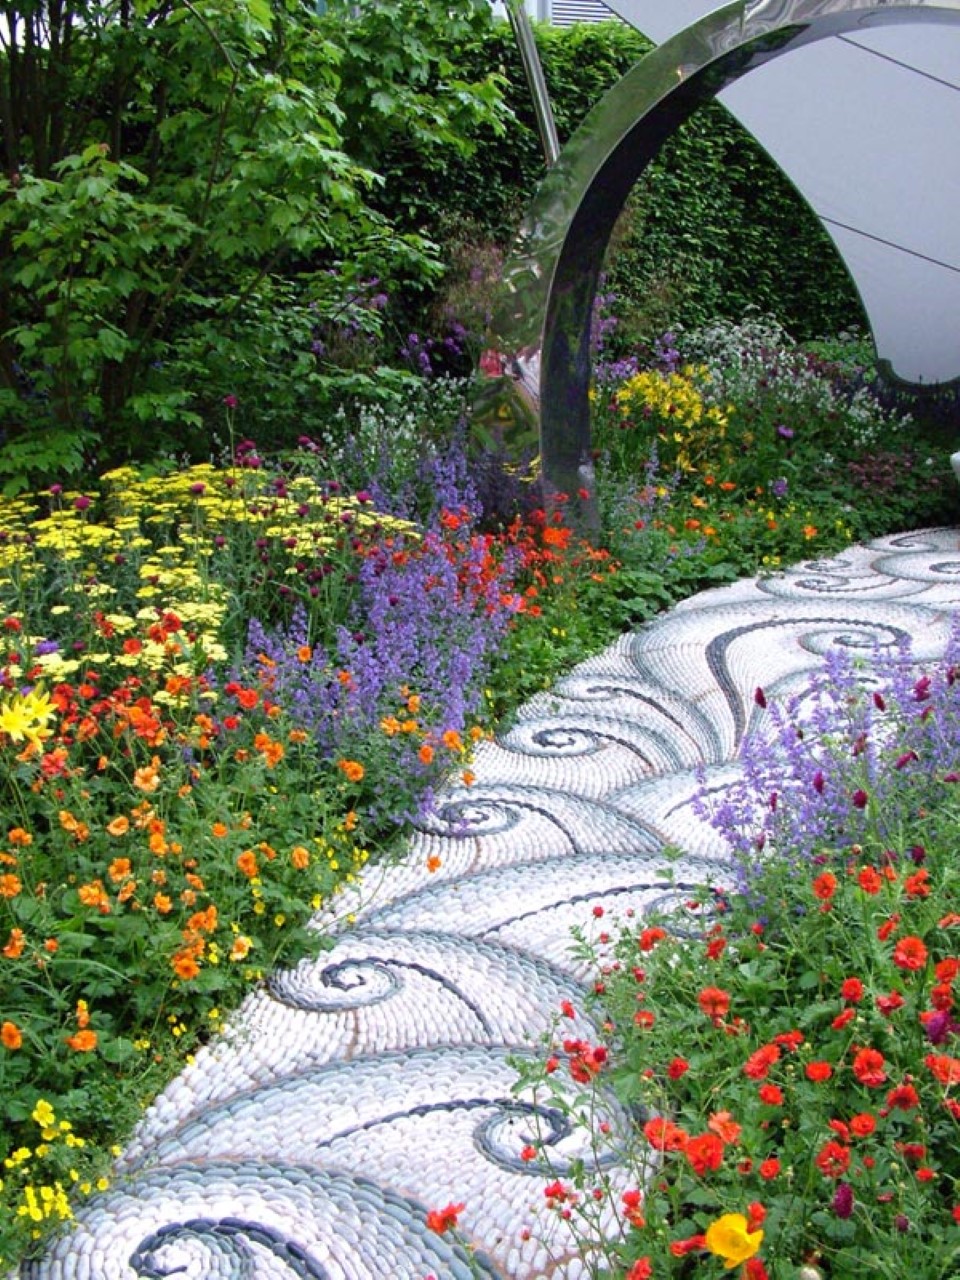 Stainless Steel With Sleek Stainless Steel Archway Combined With Adorable Color Flowery Plants And Comely Garden Path Garden Making A Wonderful Garden Path Ideas Using Stones